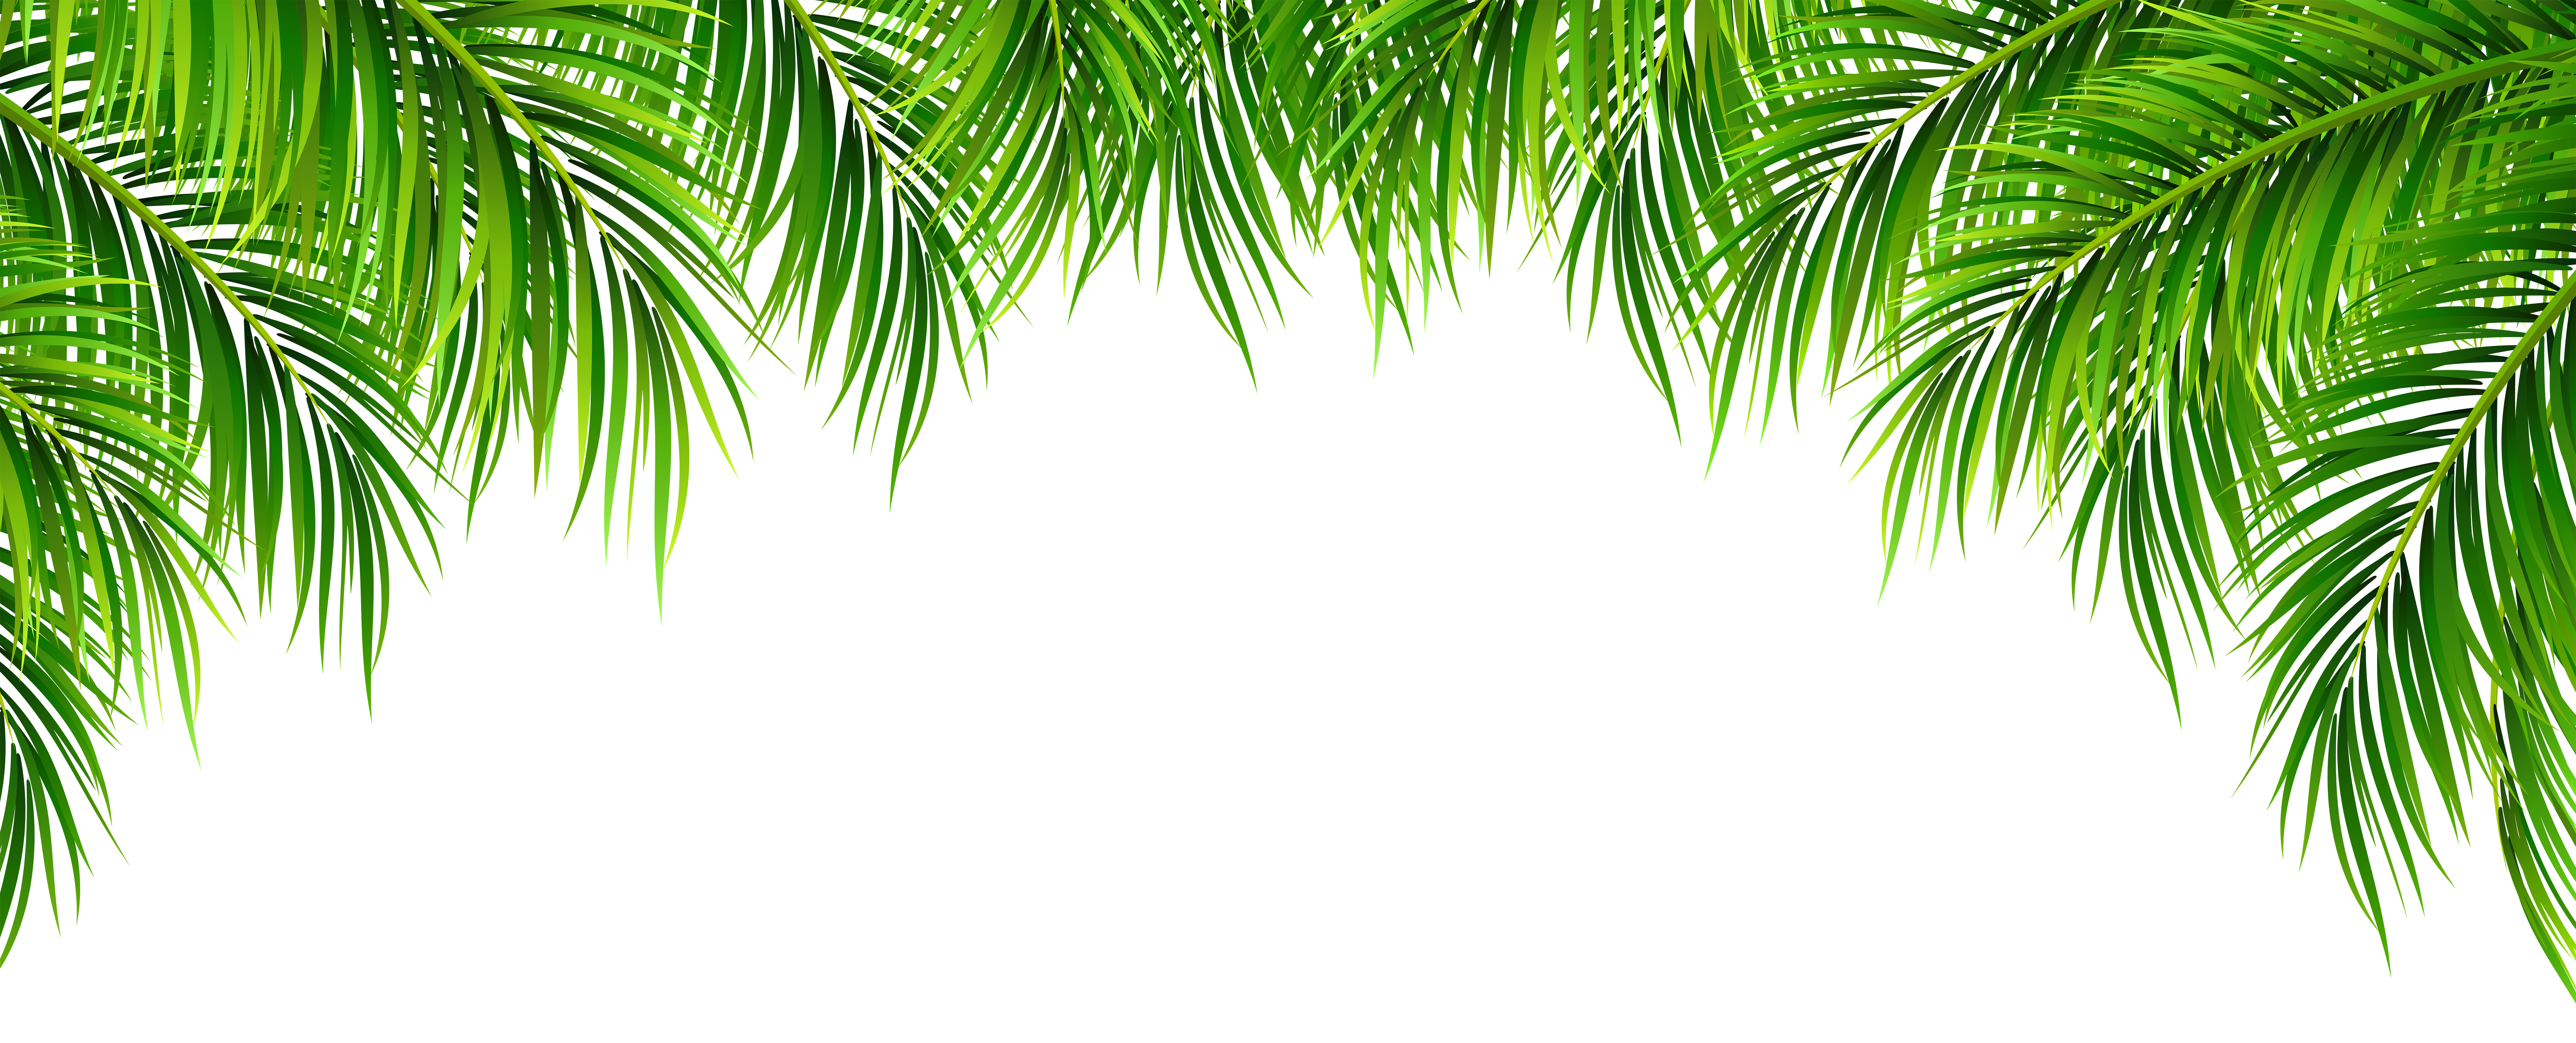 Clipart frames tree. Palm leaves decor png